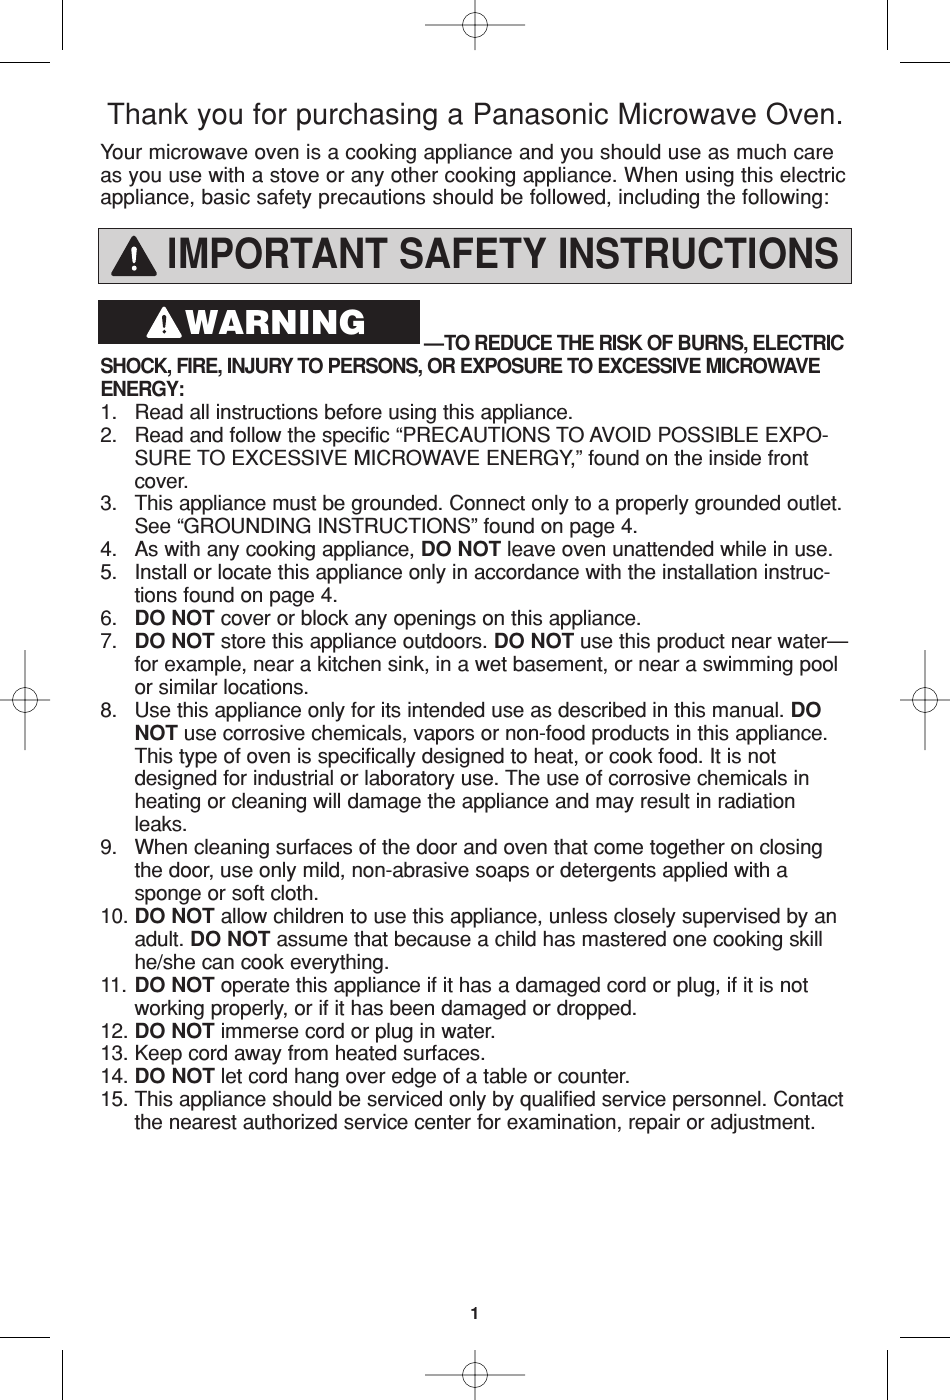 1IMPORTANT SAFETY INSTRUCTIONS—TO REDUCE THE RISK OF BURNS, ELECTRIC SHOCK, FIRE, INJURY TO PERSONS, OR EXPOSURE TO EXCESSIVE MICROWAVEENERGY:1. Read all instructions before using this appliance.2. Read and follow the specific “PRECAUTIONS TO AVOID POSSIBLE EXPO-SURE TO EXCESSIVE MICROWAVE ENERGY,” found on the inside front cover. 3. This appliance must be grounded. Connect only to a properly grounded outlet. See “GROUNDING INSTRUCTIONS” found on page 4.4. As with any cooking appliance, DO NOT leave oven unattended while in use.5. Install or locate this appliance only in accordance with the installation instruc-tions found on page 4.6. DO NOT cover or block any openings on this appliance. 7. DO NOT store this appliance outdoors. DO NOT use this product near water—for example, near a kitchen sink, in a wet basement, or near a swimming pool or similar locations.8. Use this appliance only for its intended use as described in this manual. DO NOT use corrosive chemicals, vapors or non-food products in this appliance. This type of oven is specifically designed to heat, or cook food. It is not designed for industrial or laboratory use. The use of corrosive chemicals in heating or cleaning will damage the appliance and may result in radiation leaks.9. When cleaning surfaces of the door and oven that come together on closing  the door, use only mild, non-abrasive soaps or detergents applied with a  sponge or soft cloth. 10. DO NOT allow children to use this appliance, unless closely supervised by an adult. DO NOT assume that because a child has mastered one cooking skill he/she can cook everything.11. DO NOT operate this appliance if it has a damaged cord or plug, if it is not working properly, or if it has been damaged or dropped.12. DO NOT immerse cord or plug in water. 13. Keep cord away from heated surfaces.14. DO NOT let cord hang over edge of a table or counter.15. This appliance should be serviced only by qualified service personnel. Contact the nearest authorized service center for examination, repair or adjustment. Your microwave oven is a cooking appliance and you should use as much careas you use with a stove or any other cooking appliance. When using this electricappliance, basic safety precautions should be followed, including the following:Thank you for purchasing a Panasonic Microwave Oven.WARNING